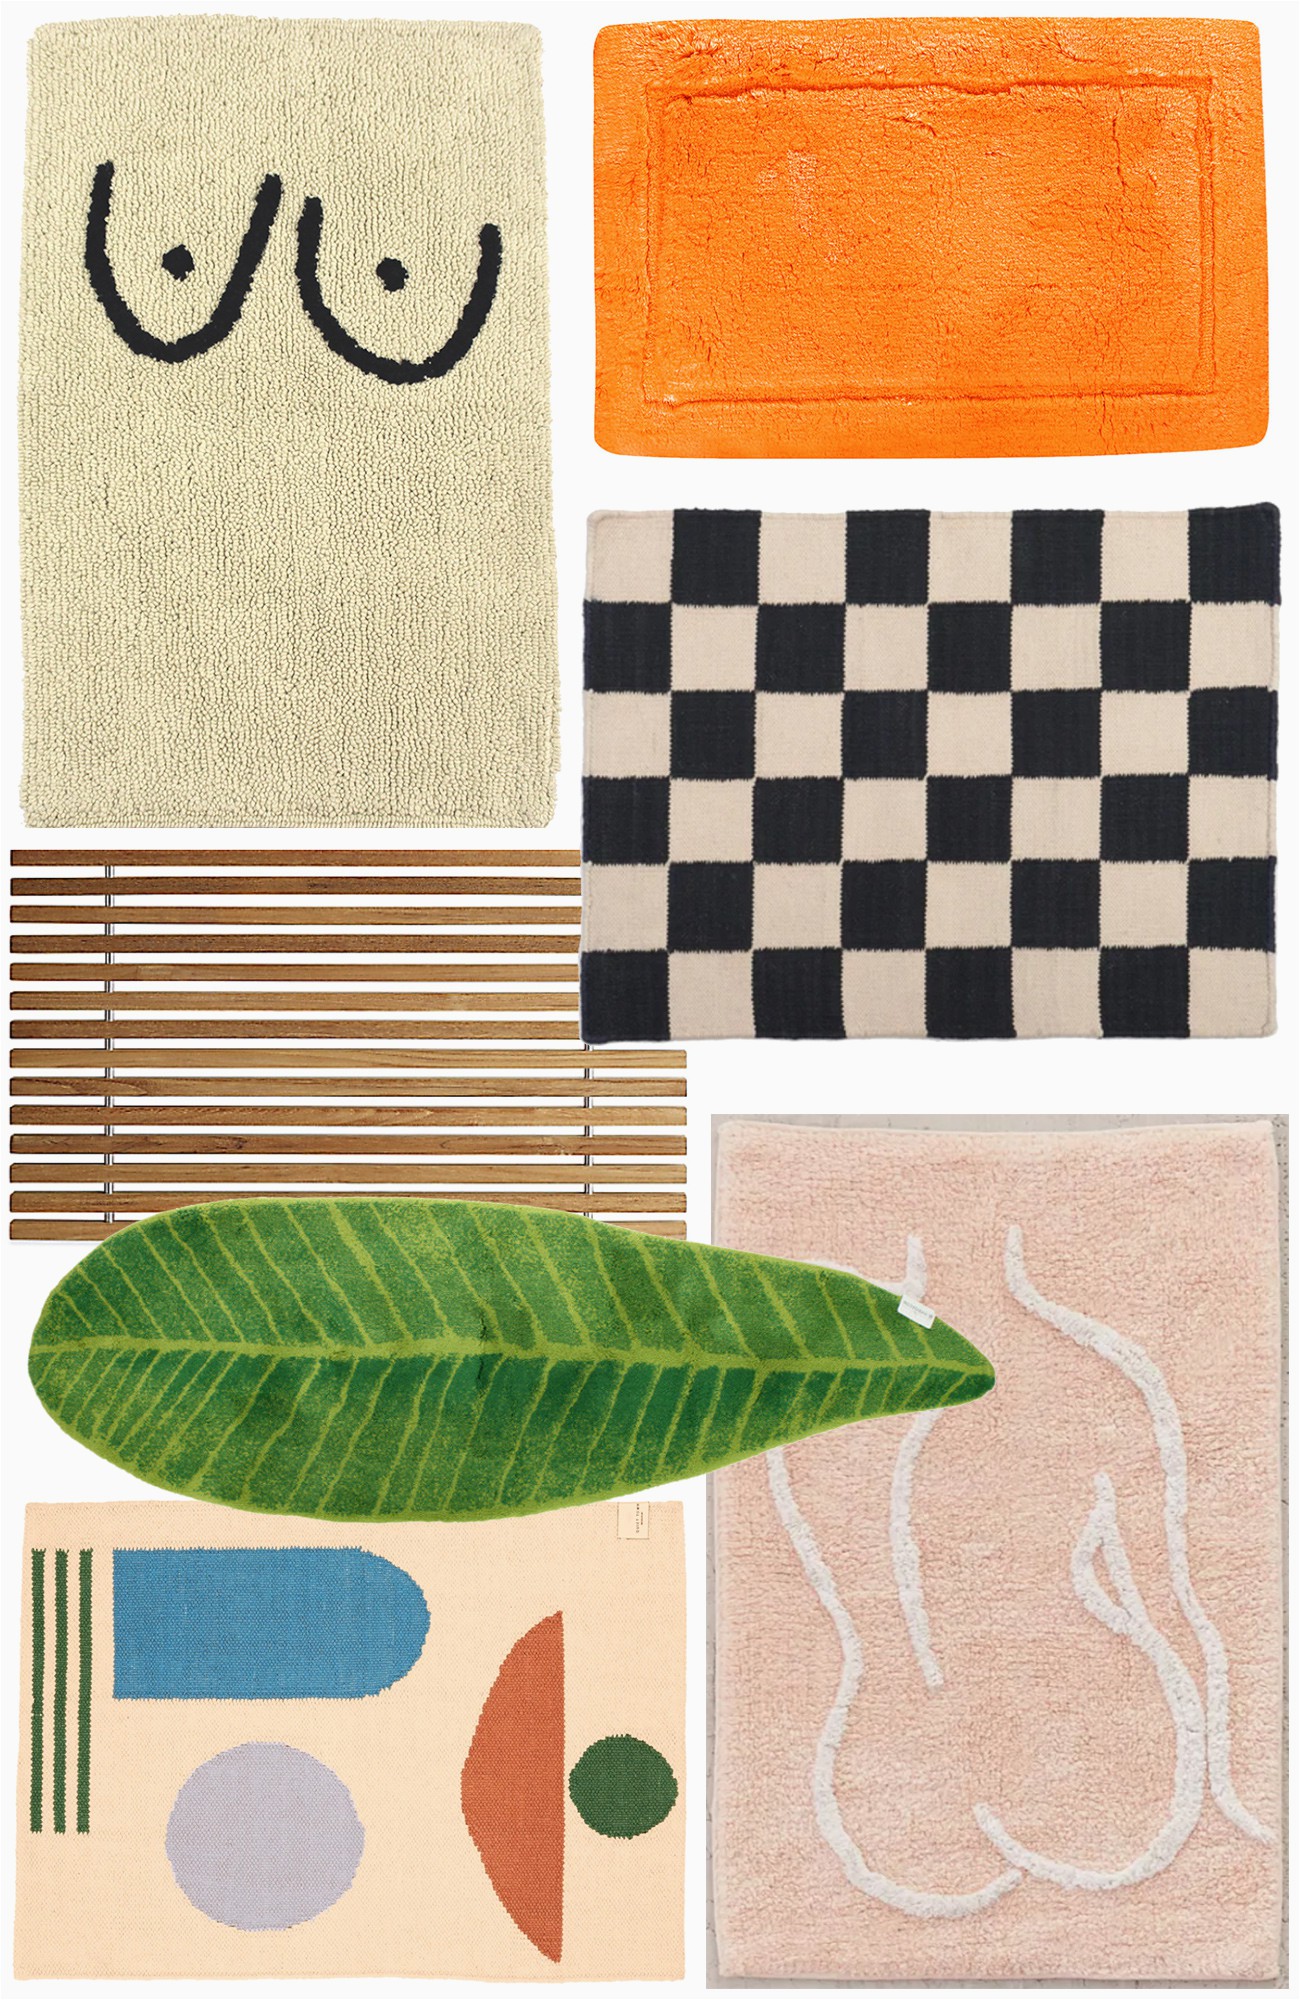 Orange Bathroom Rugs and towels the Best Bath Mats some Cool In Home Shops the Stripe